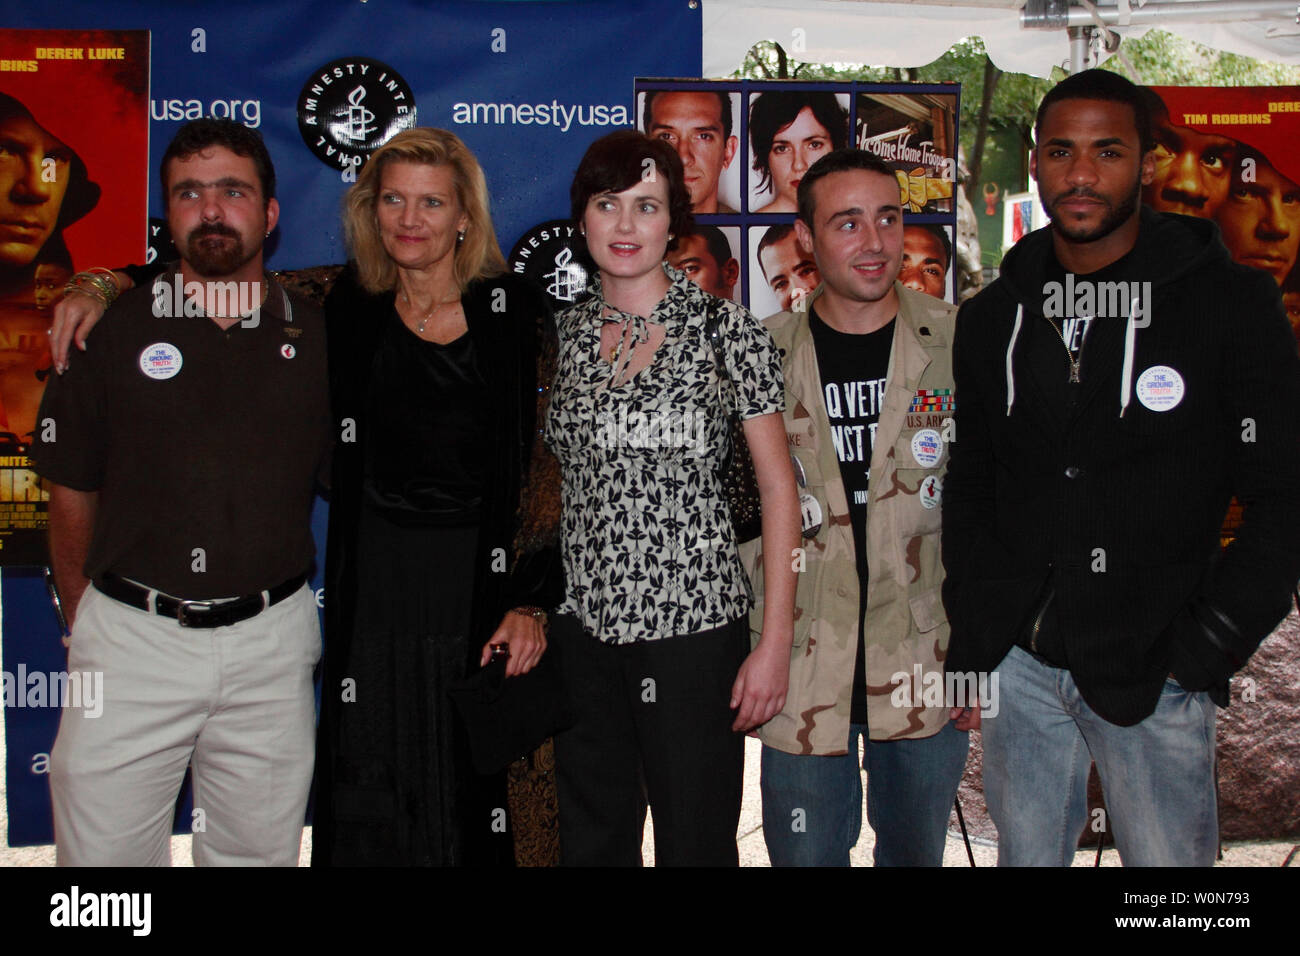 Patricia Foulkrod (2nd L), director of the documentary 'The Ground Truth', stands with subjects of the film, former U.S. soldiers Charlie Anderson (L), Kelly Dougherty (C), Michael Blake (2nd R), and Demond Mullins (R), as they arrive for the opening of the Amnesty International Film Festival in Washington, September 14, 2006. (UPI Photo/Kamenko Pajic) Stock Photo